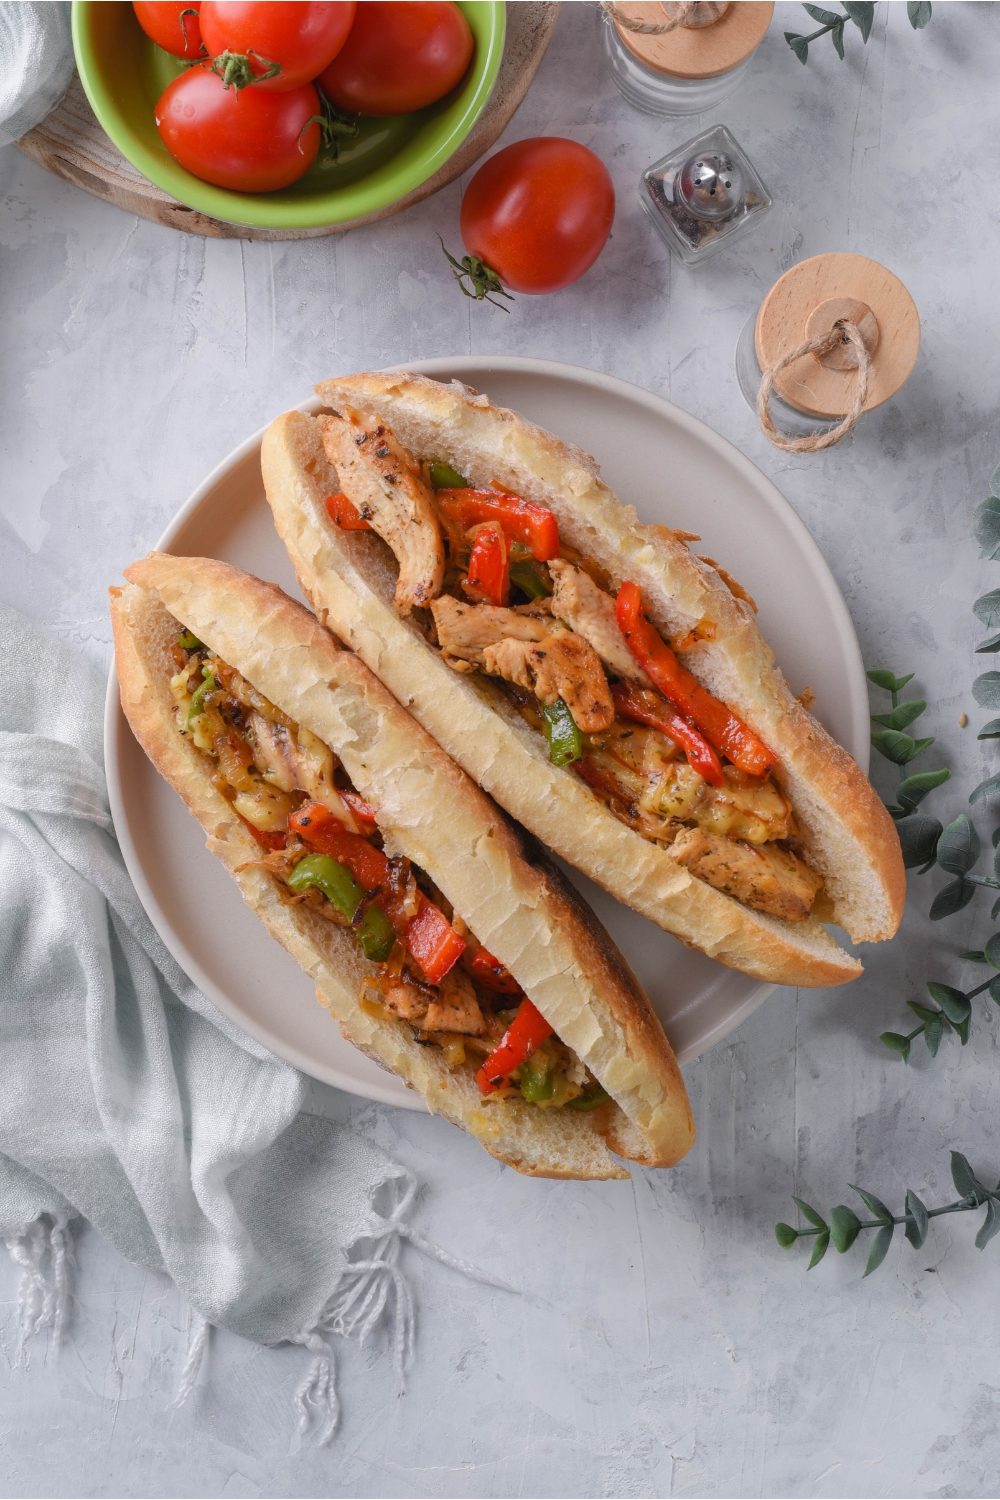 Overhead of two hoagie rolls sliced in half and stuffed with sautéed peppers, onions, and shredded chicken.